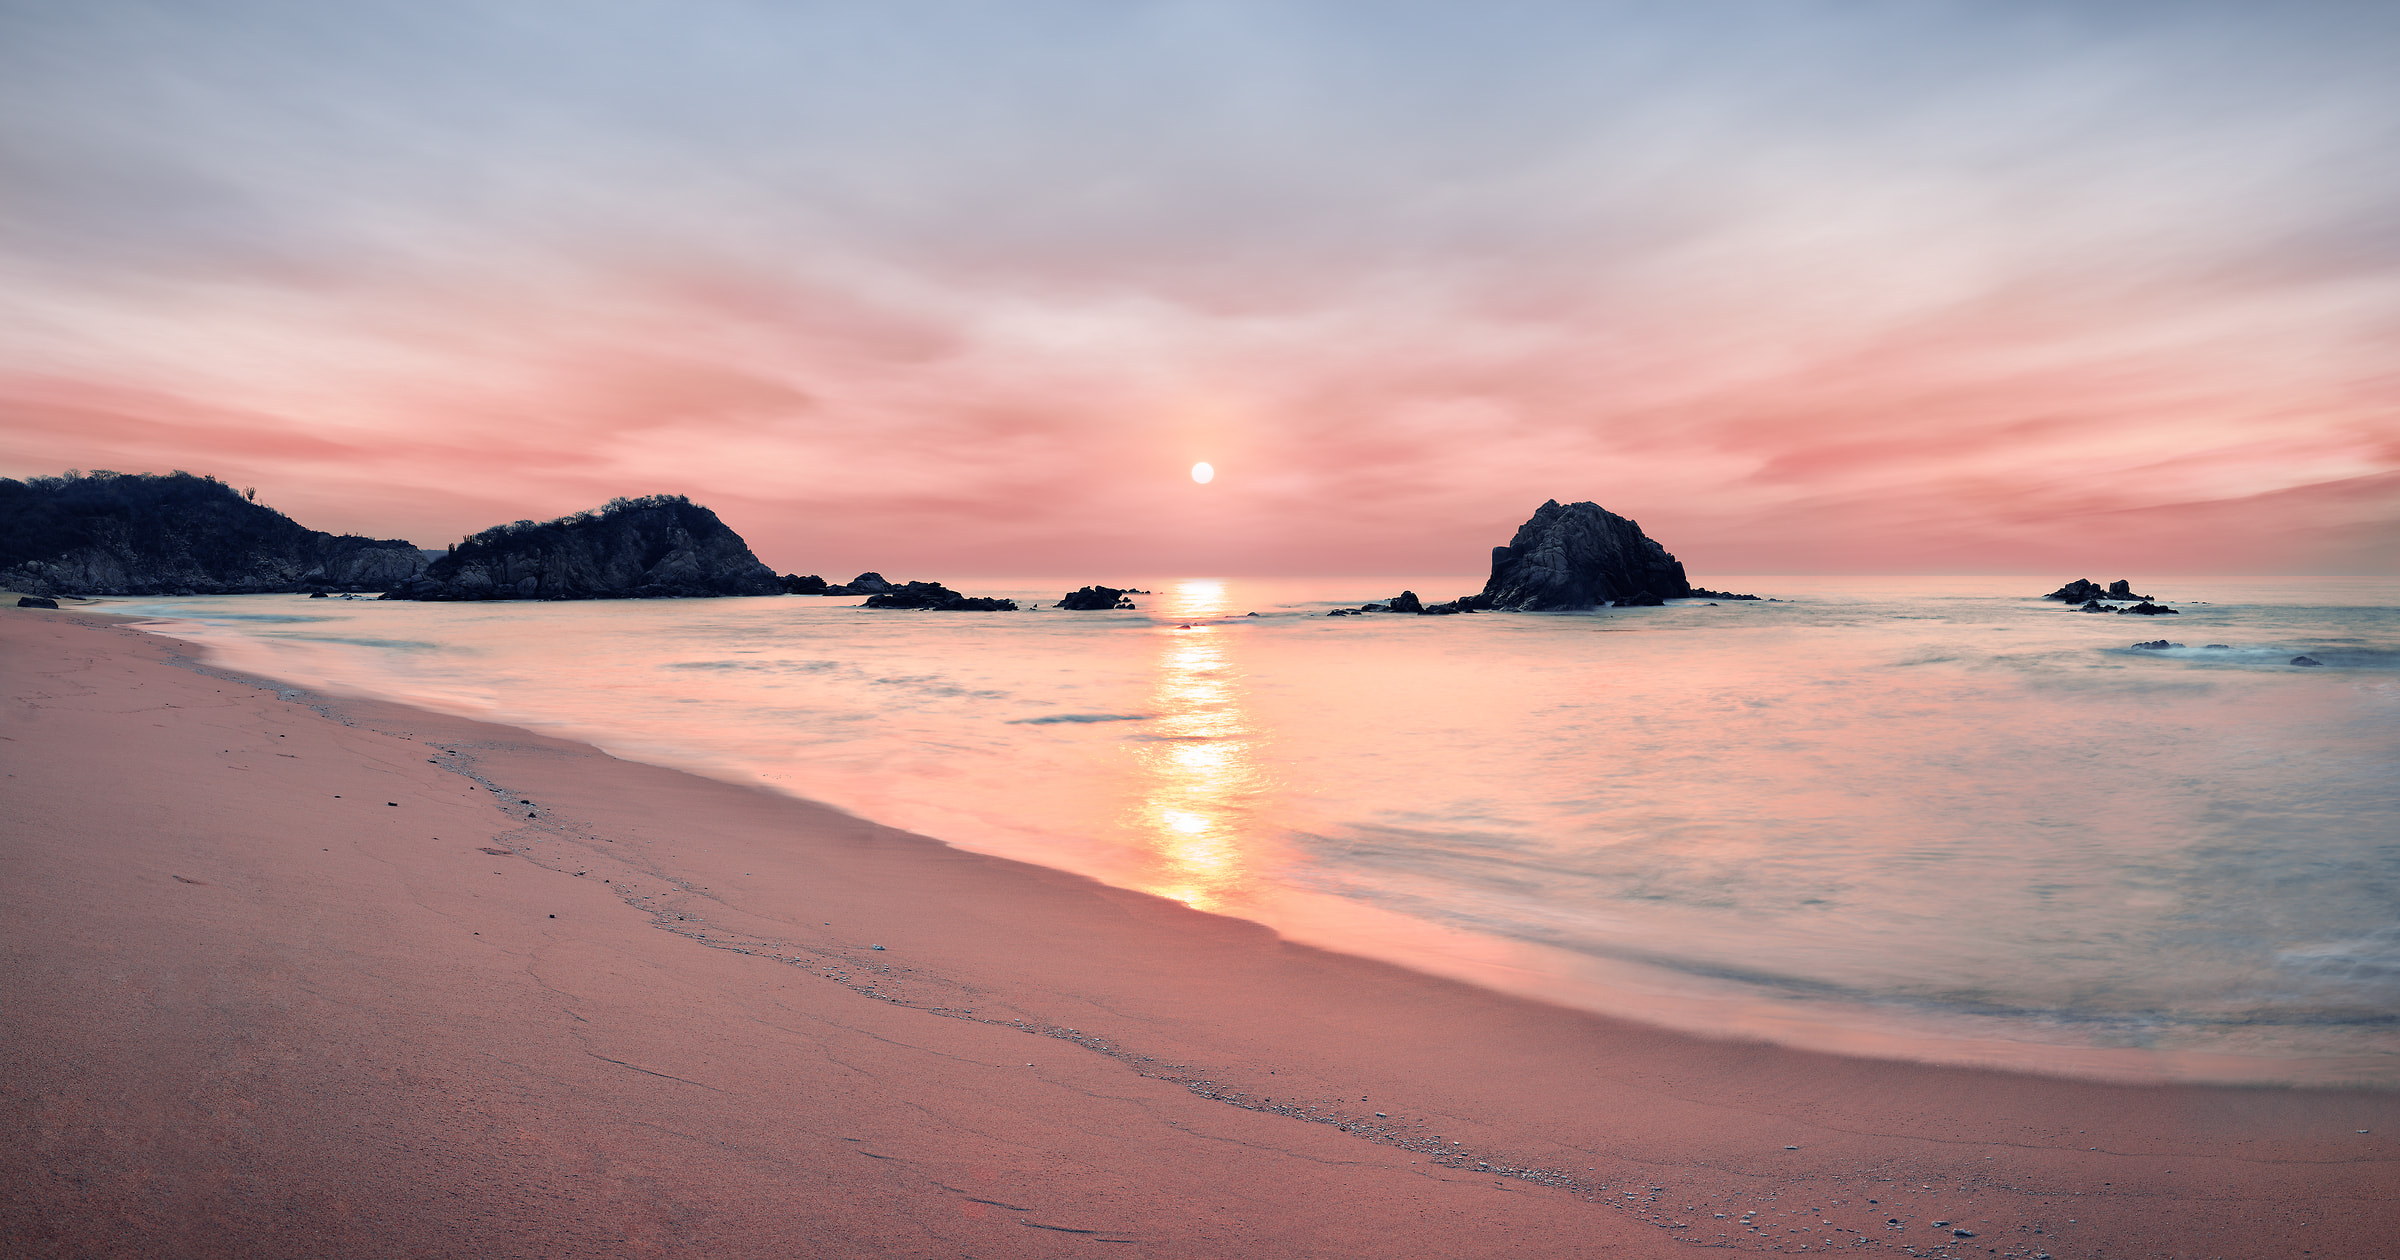 434 megapixels! A very high resolution, large-format VAST photo print of sunrise on a beach; landscape photograph created by Scott Dimond in Huatulco, Oaxaca, Mexico.